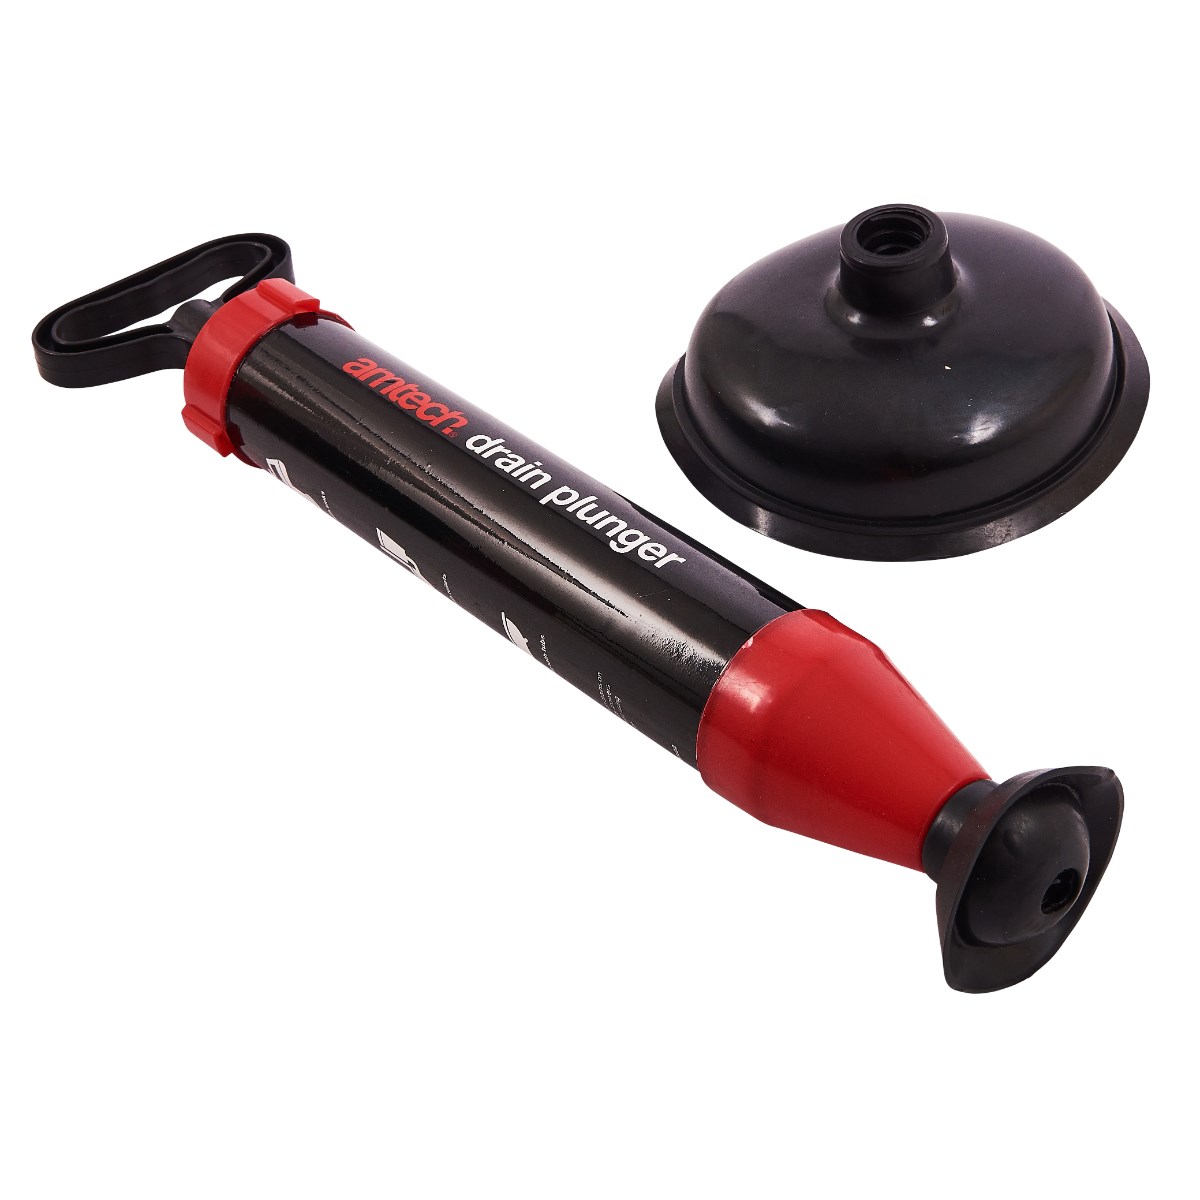 Am-Tech Suction Plunger Rubber Head for Clearing Block Drains and Sinks 